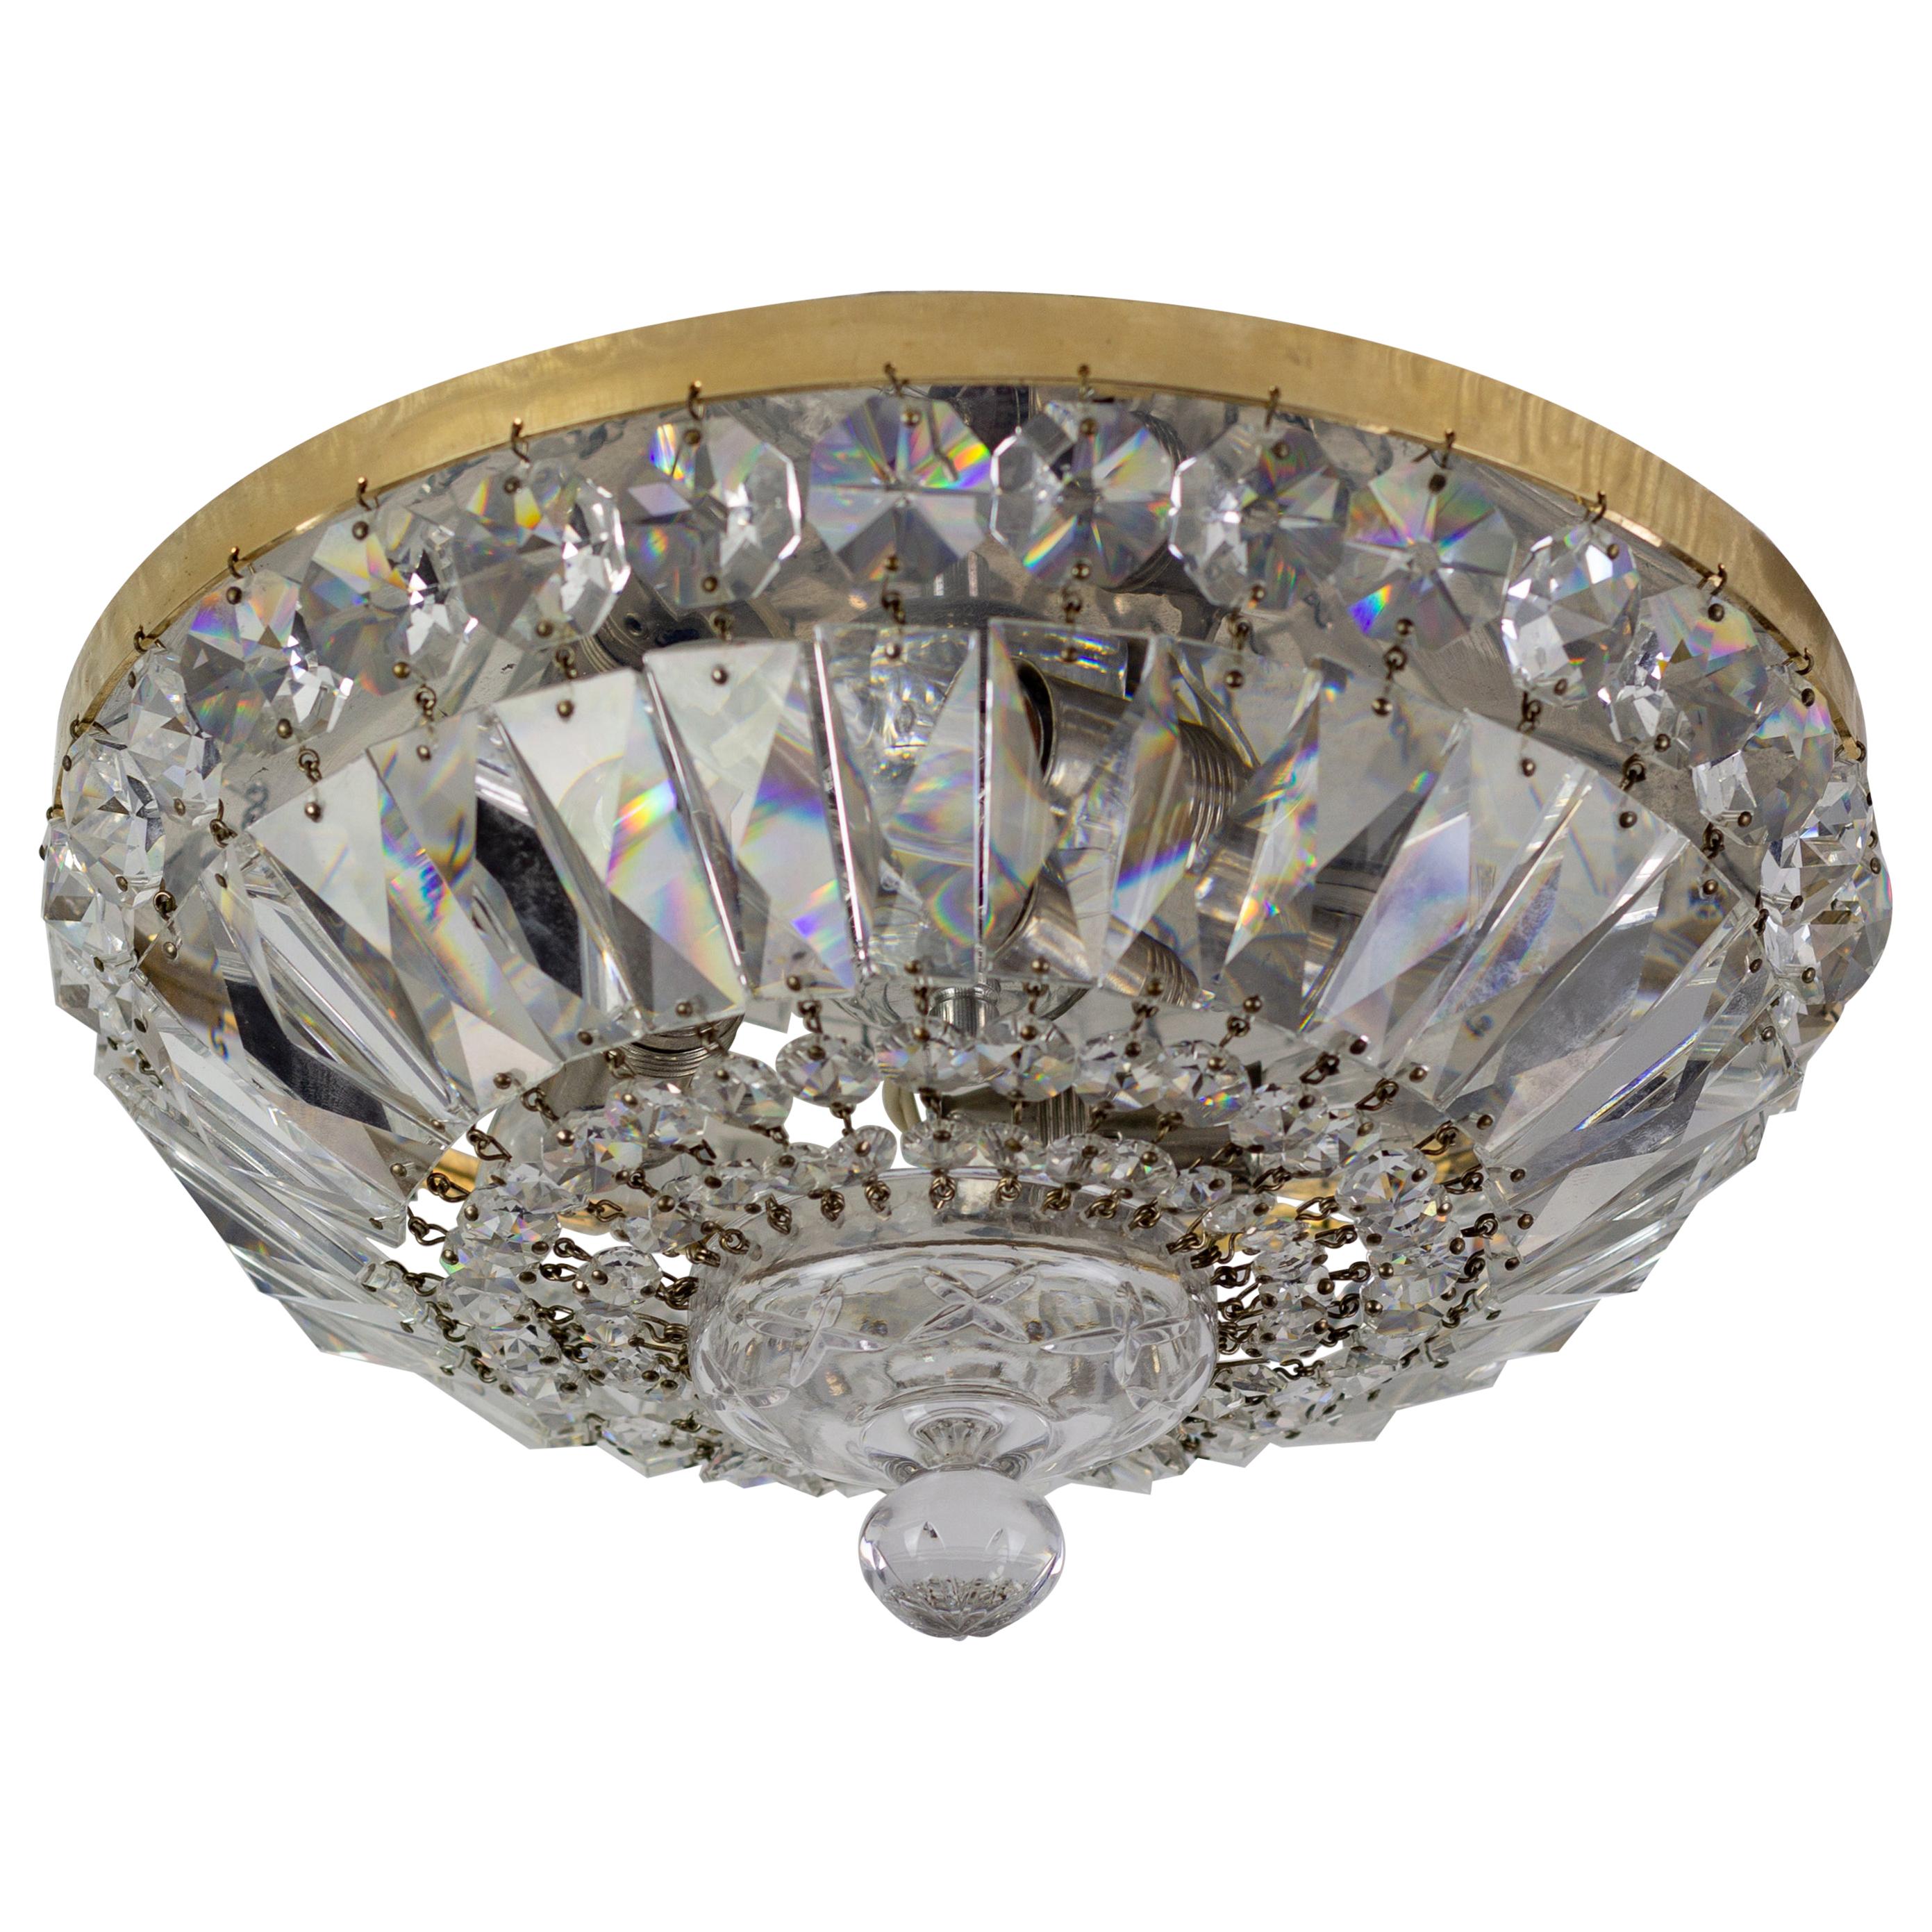 Mid-century Crystal and Glass Three-Light Basket Flush Mount Ceiling Fixture